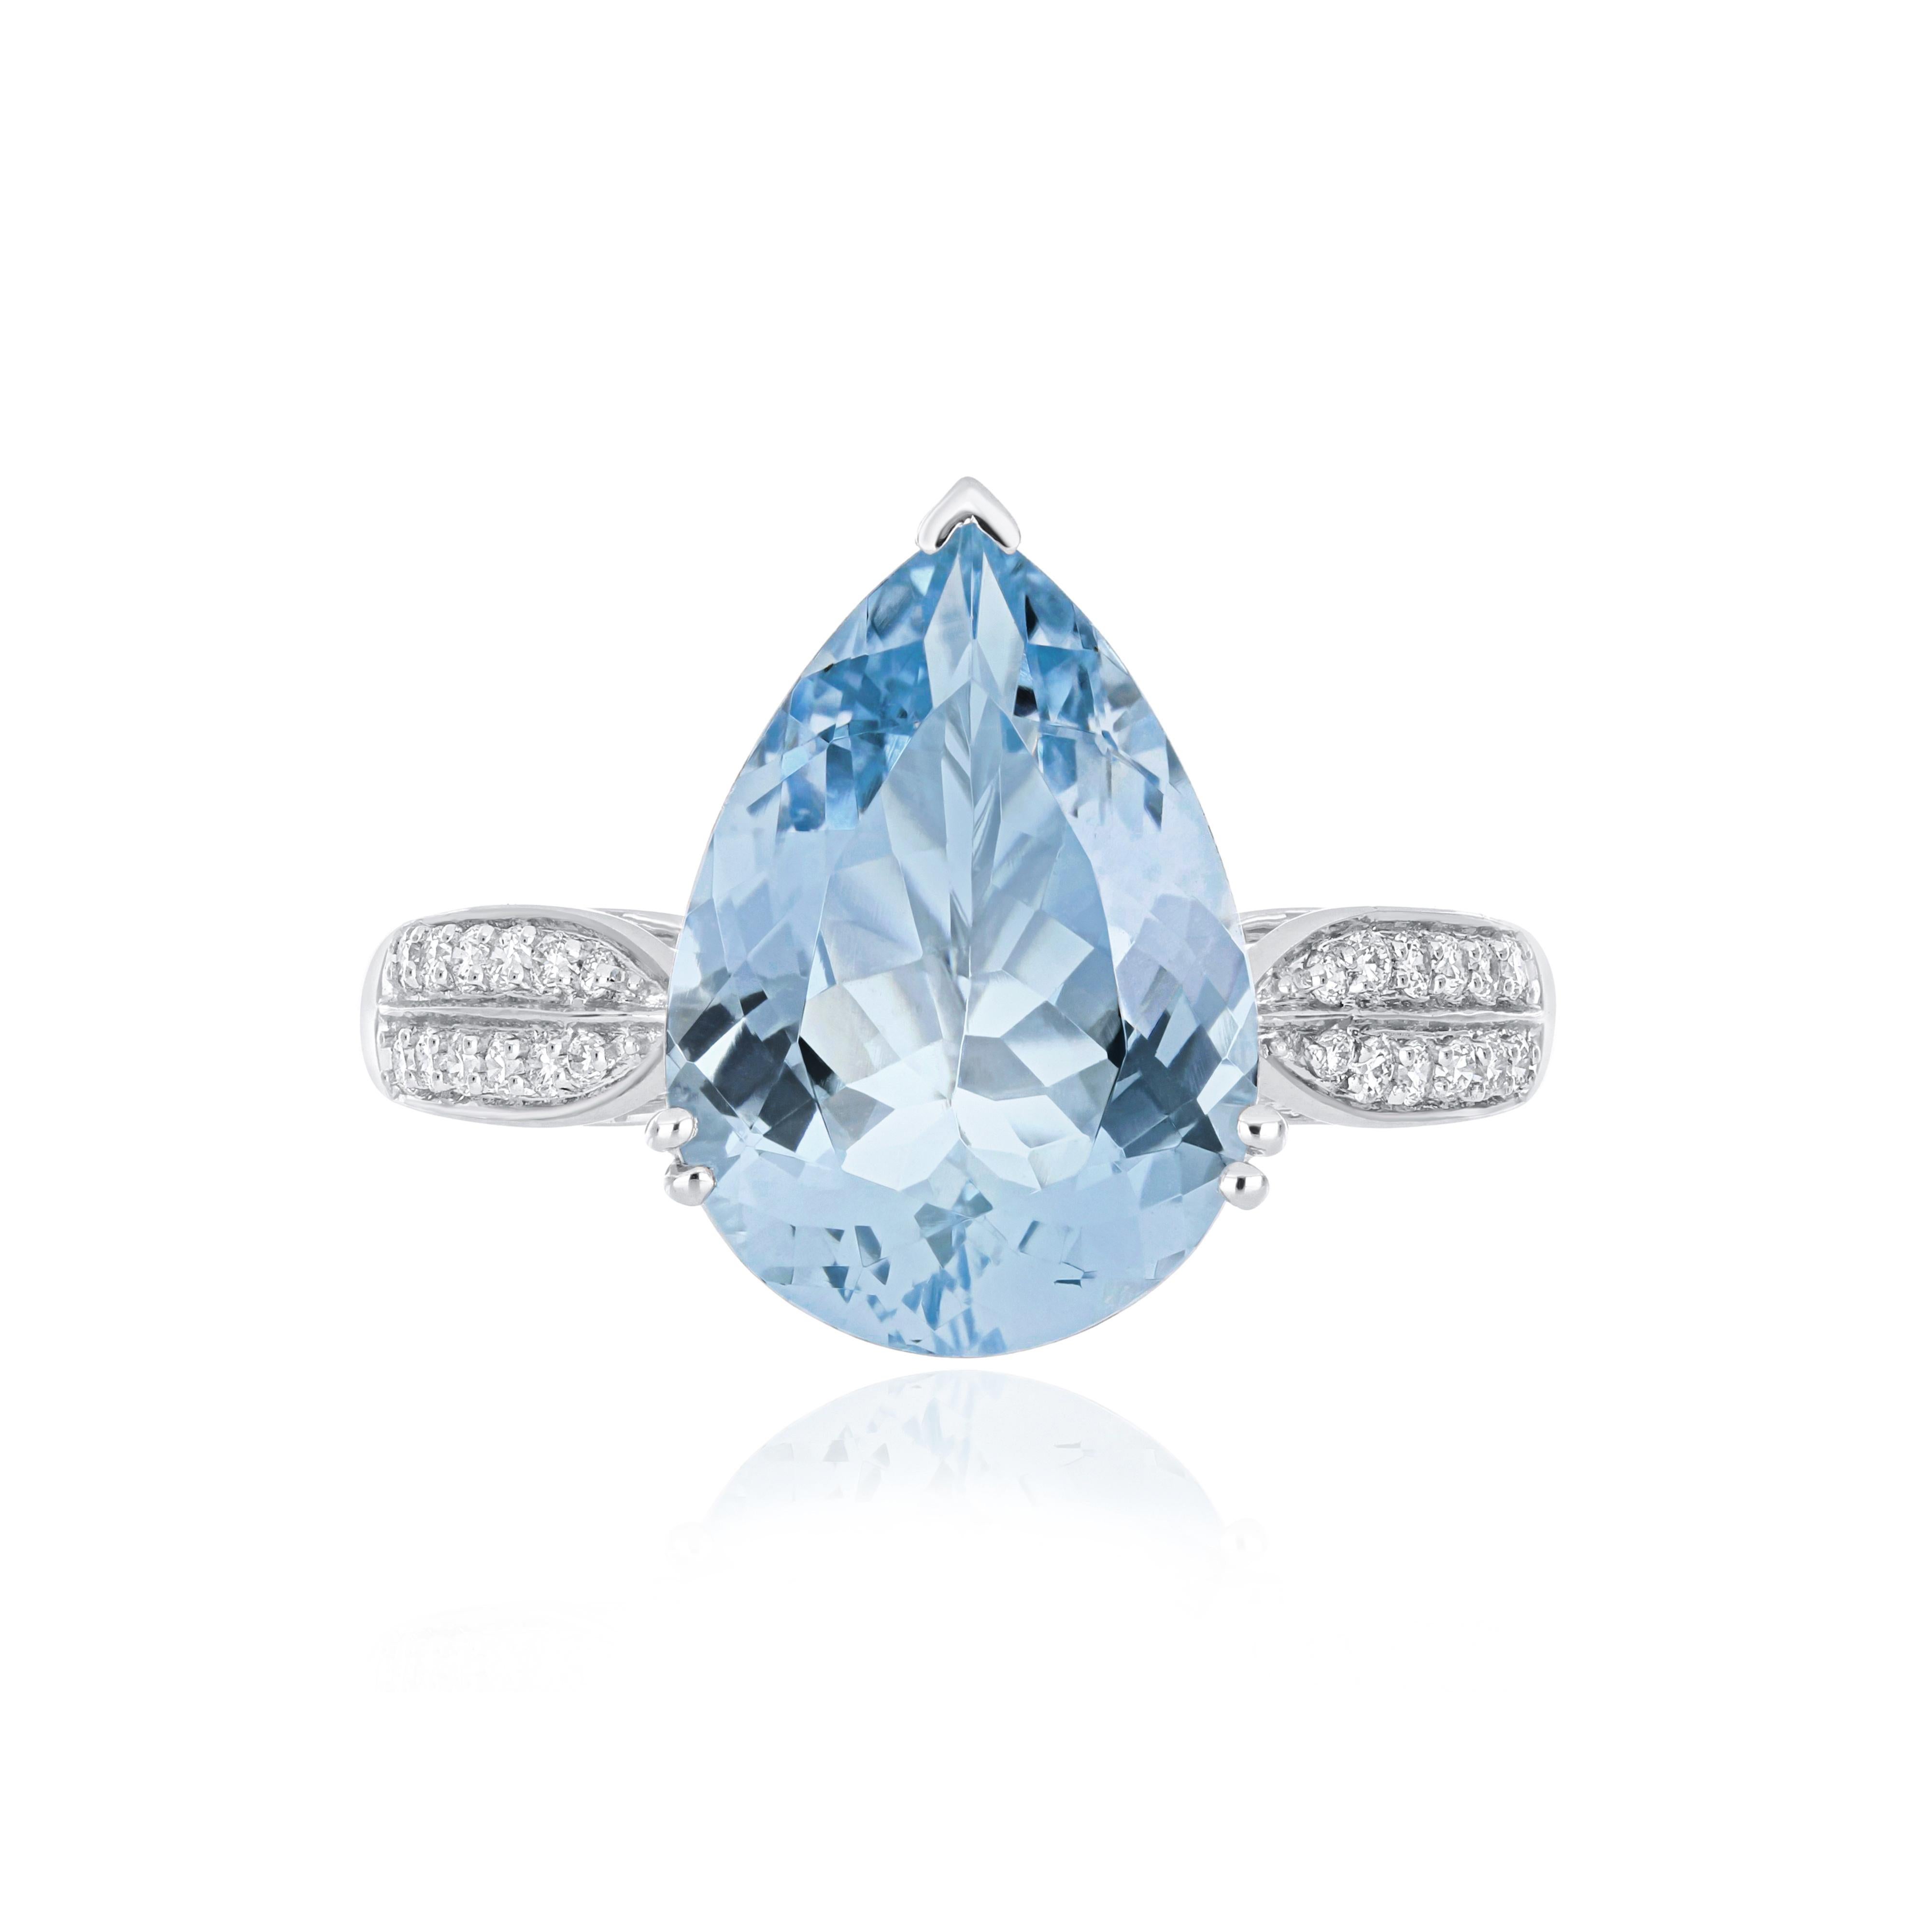 Elegant and exquisitely detailed 18 Karat White Gold Ring, center set with Aquamarine Pear Shape with approx. 4.24Cts. Diamond Brilliant Round Shape with approx. 0.139Cts Beautifully Hand crafted in 18 Karat White Gold.

Stone Detail:
Aquamarine